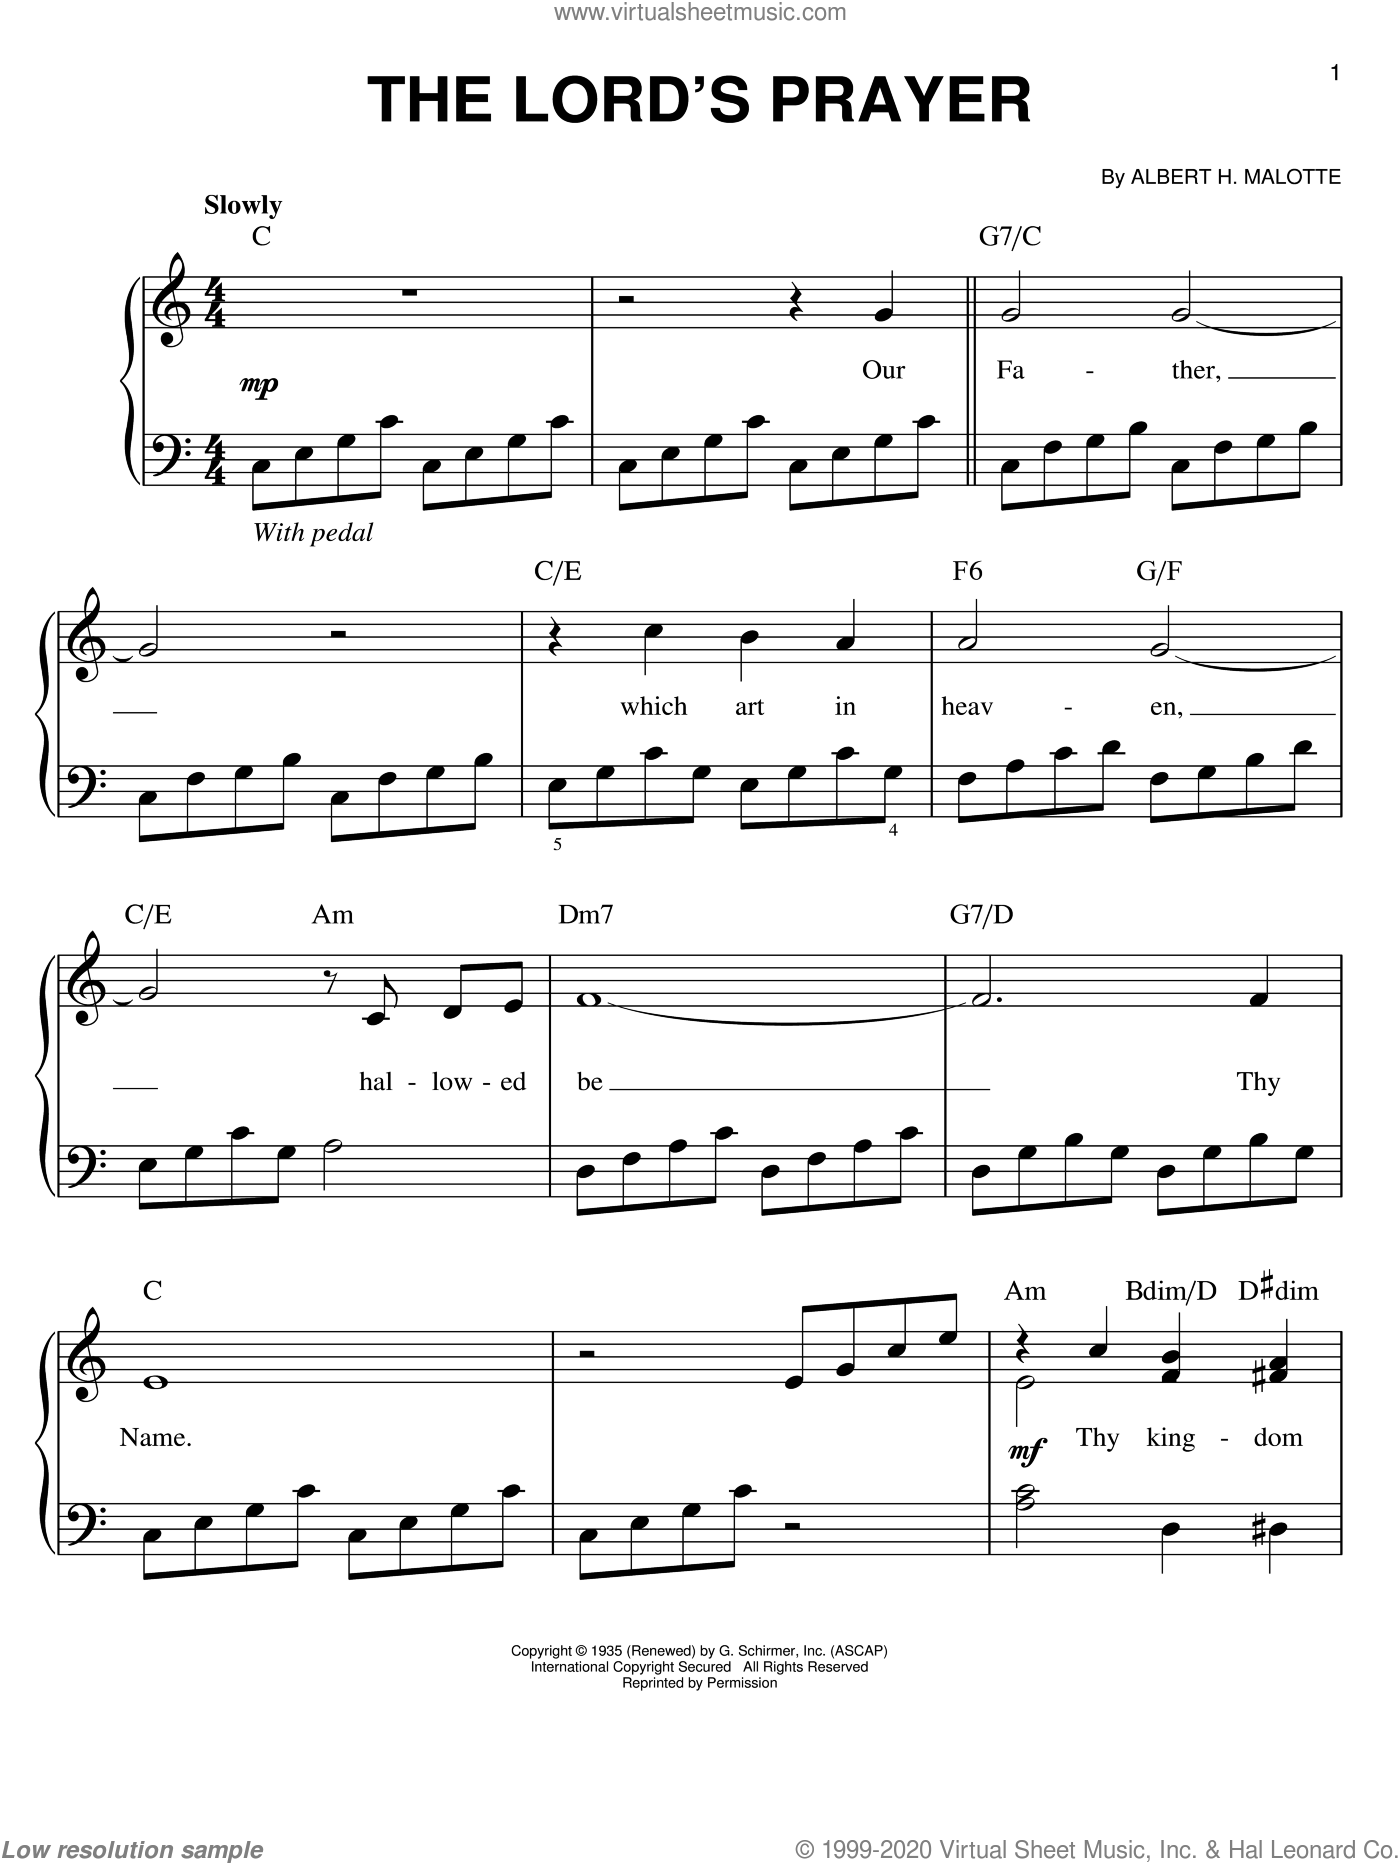 Sinatra - The Lord's Prayer sheet music for piano solo (PDF)